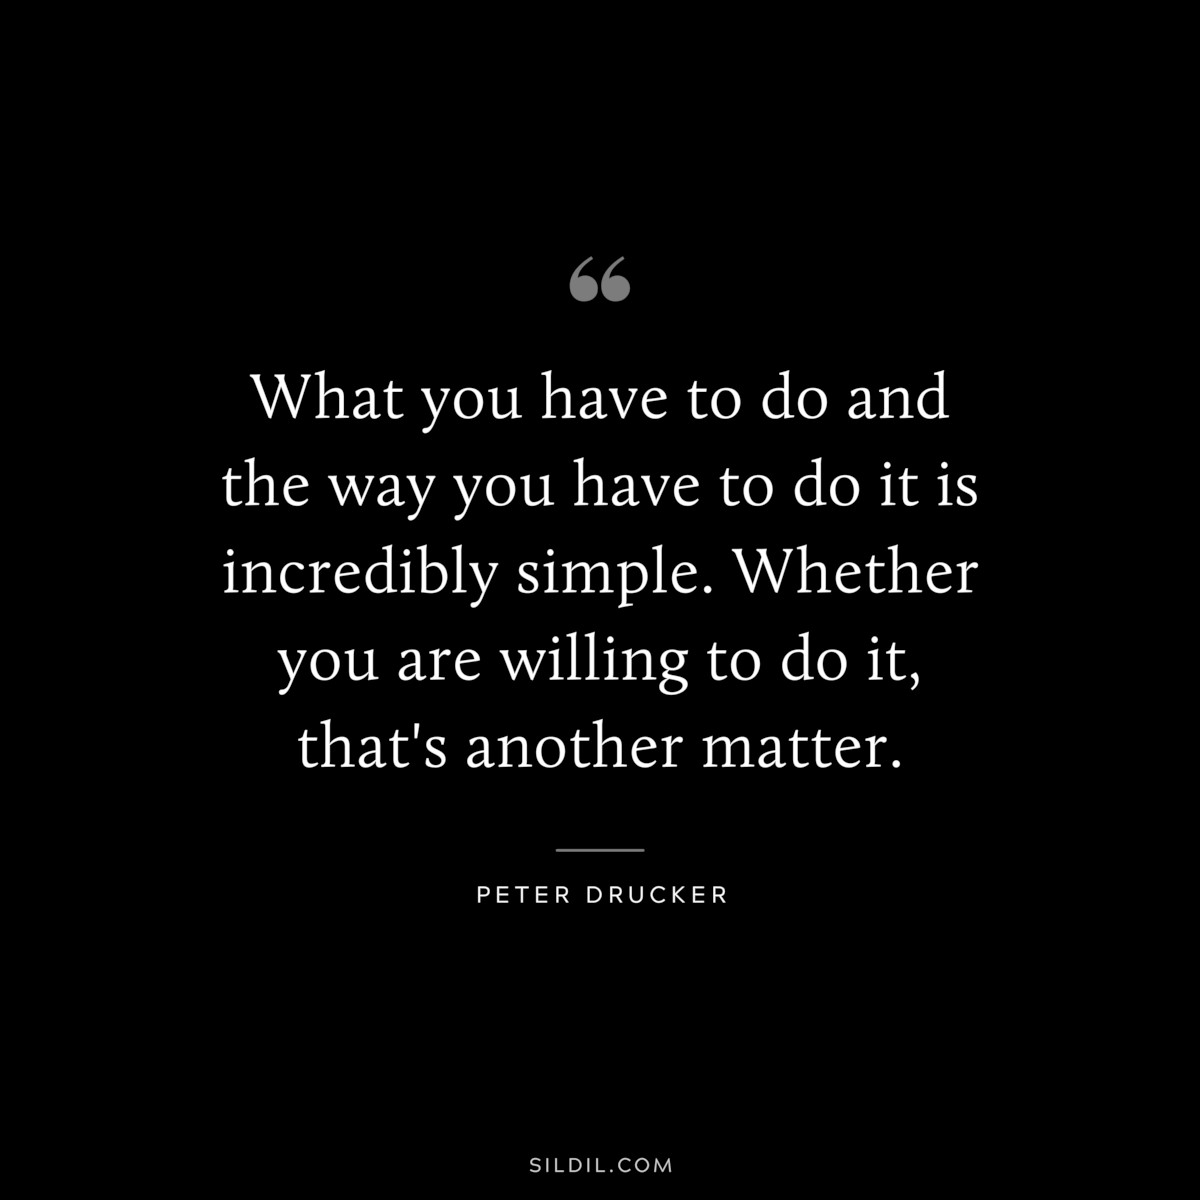 What you have to do and the way you have to do it is incredibly simple. Whether you are willing to do it, that's another matter. ― Peter Drucker